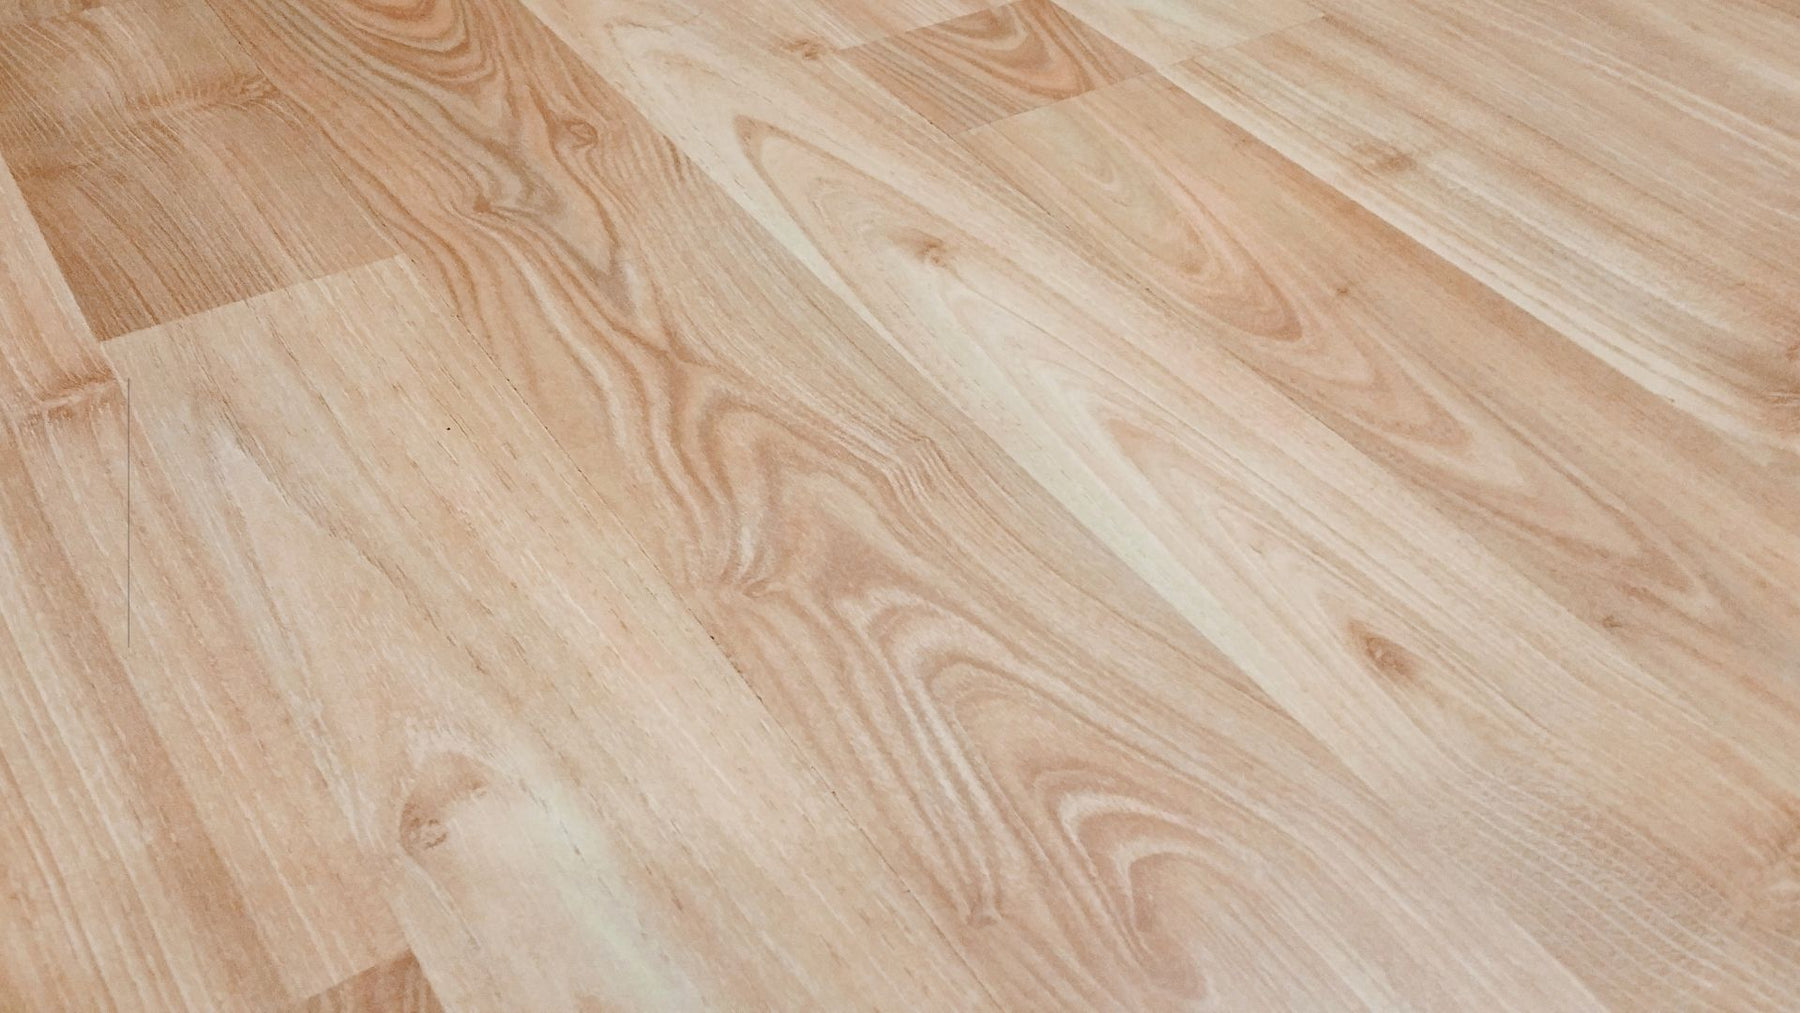 What Should Be Considered When Choosing Flooring?